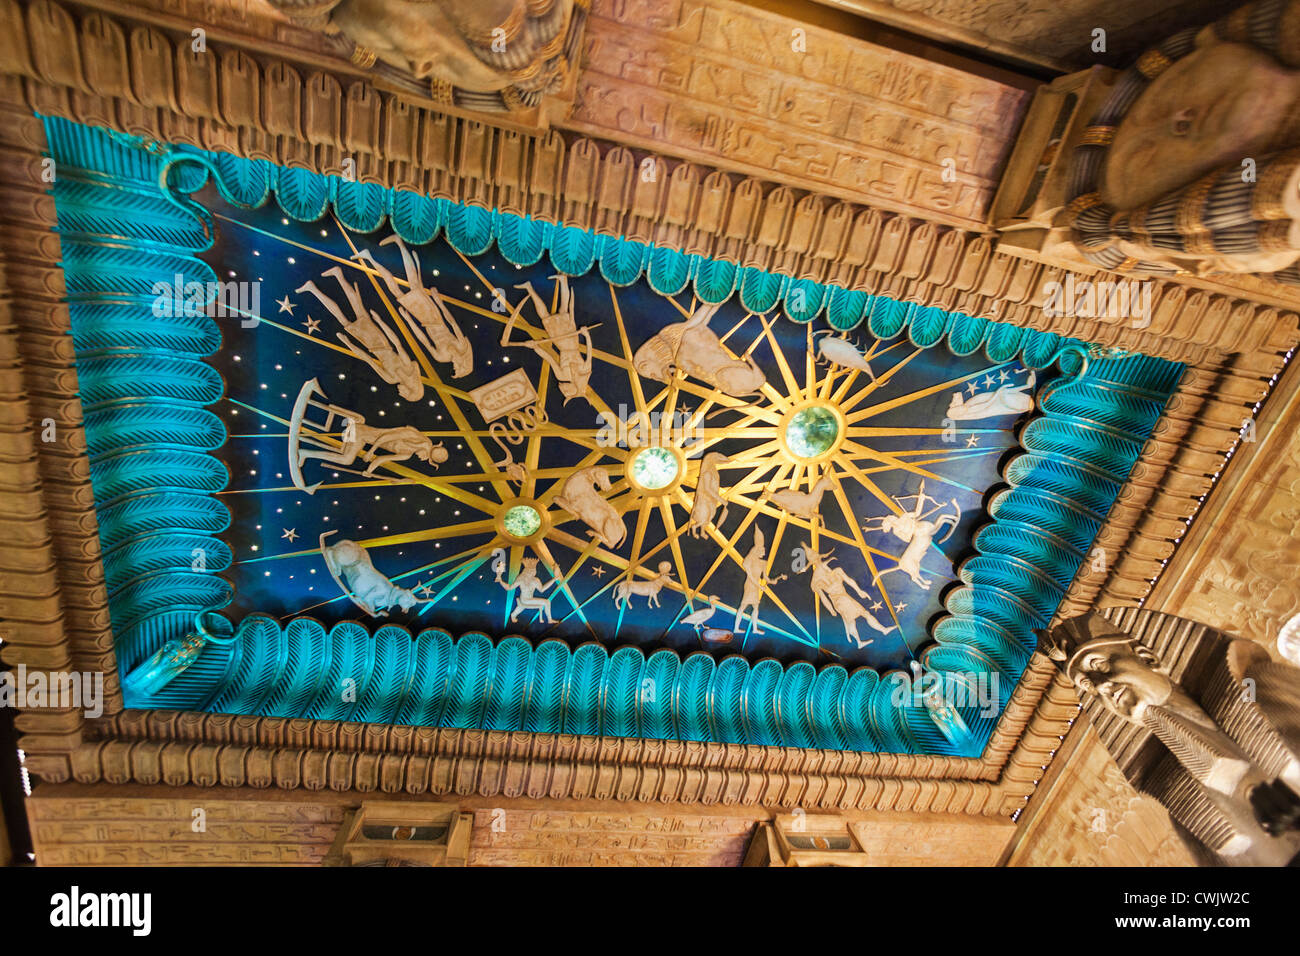 Harrods, The Egyptian Escalator, The Ceiling depicting The Night Sky with Zodiacal Figures designer William George Mitchell Stock Photo